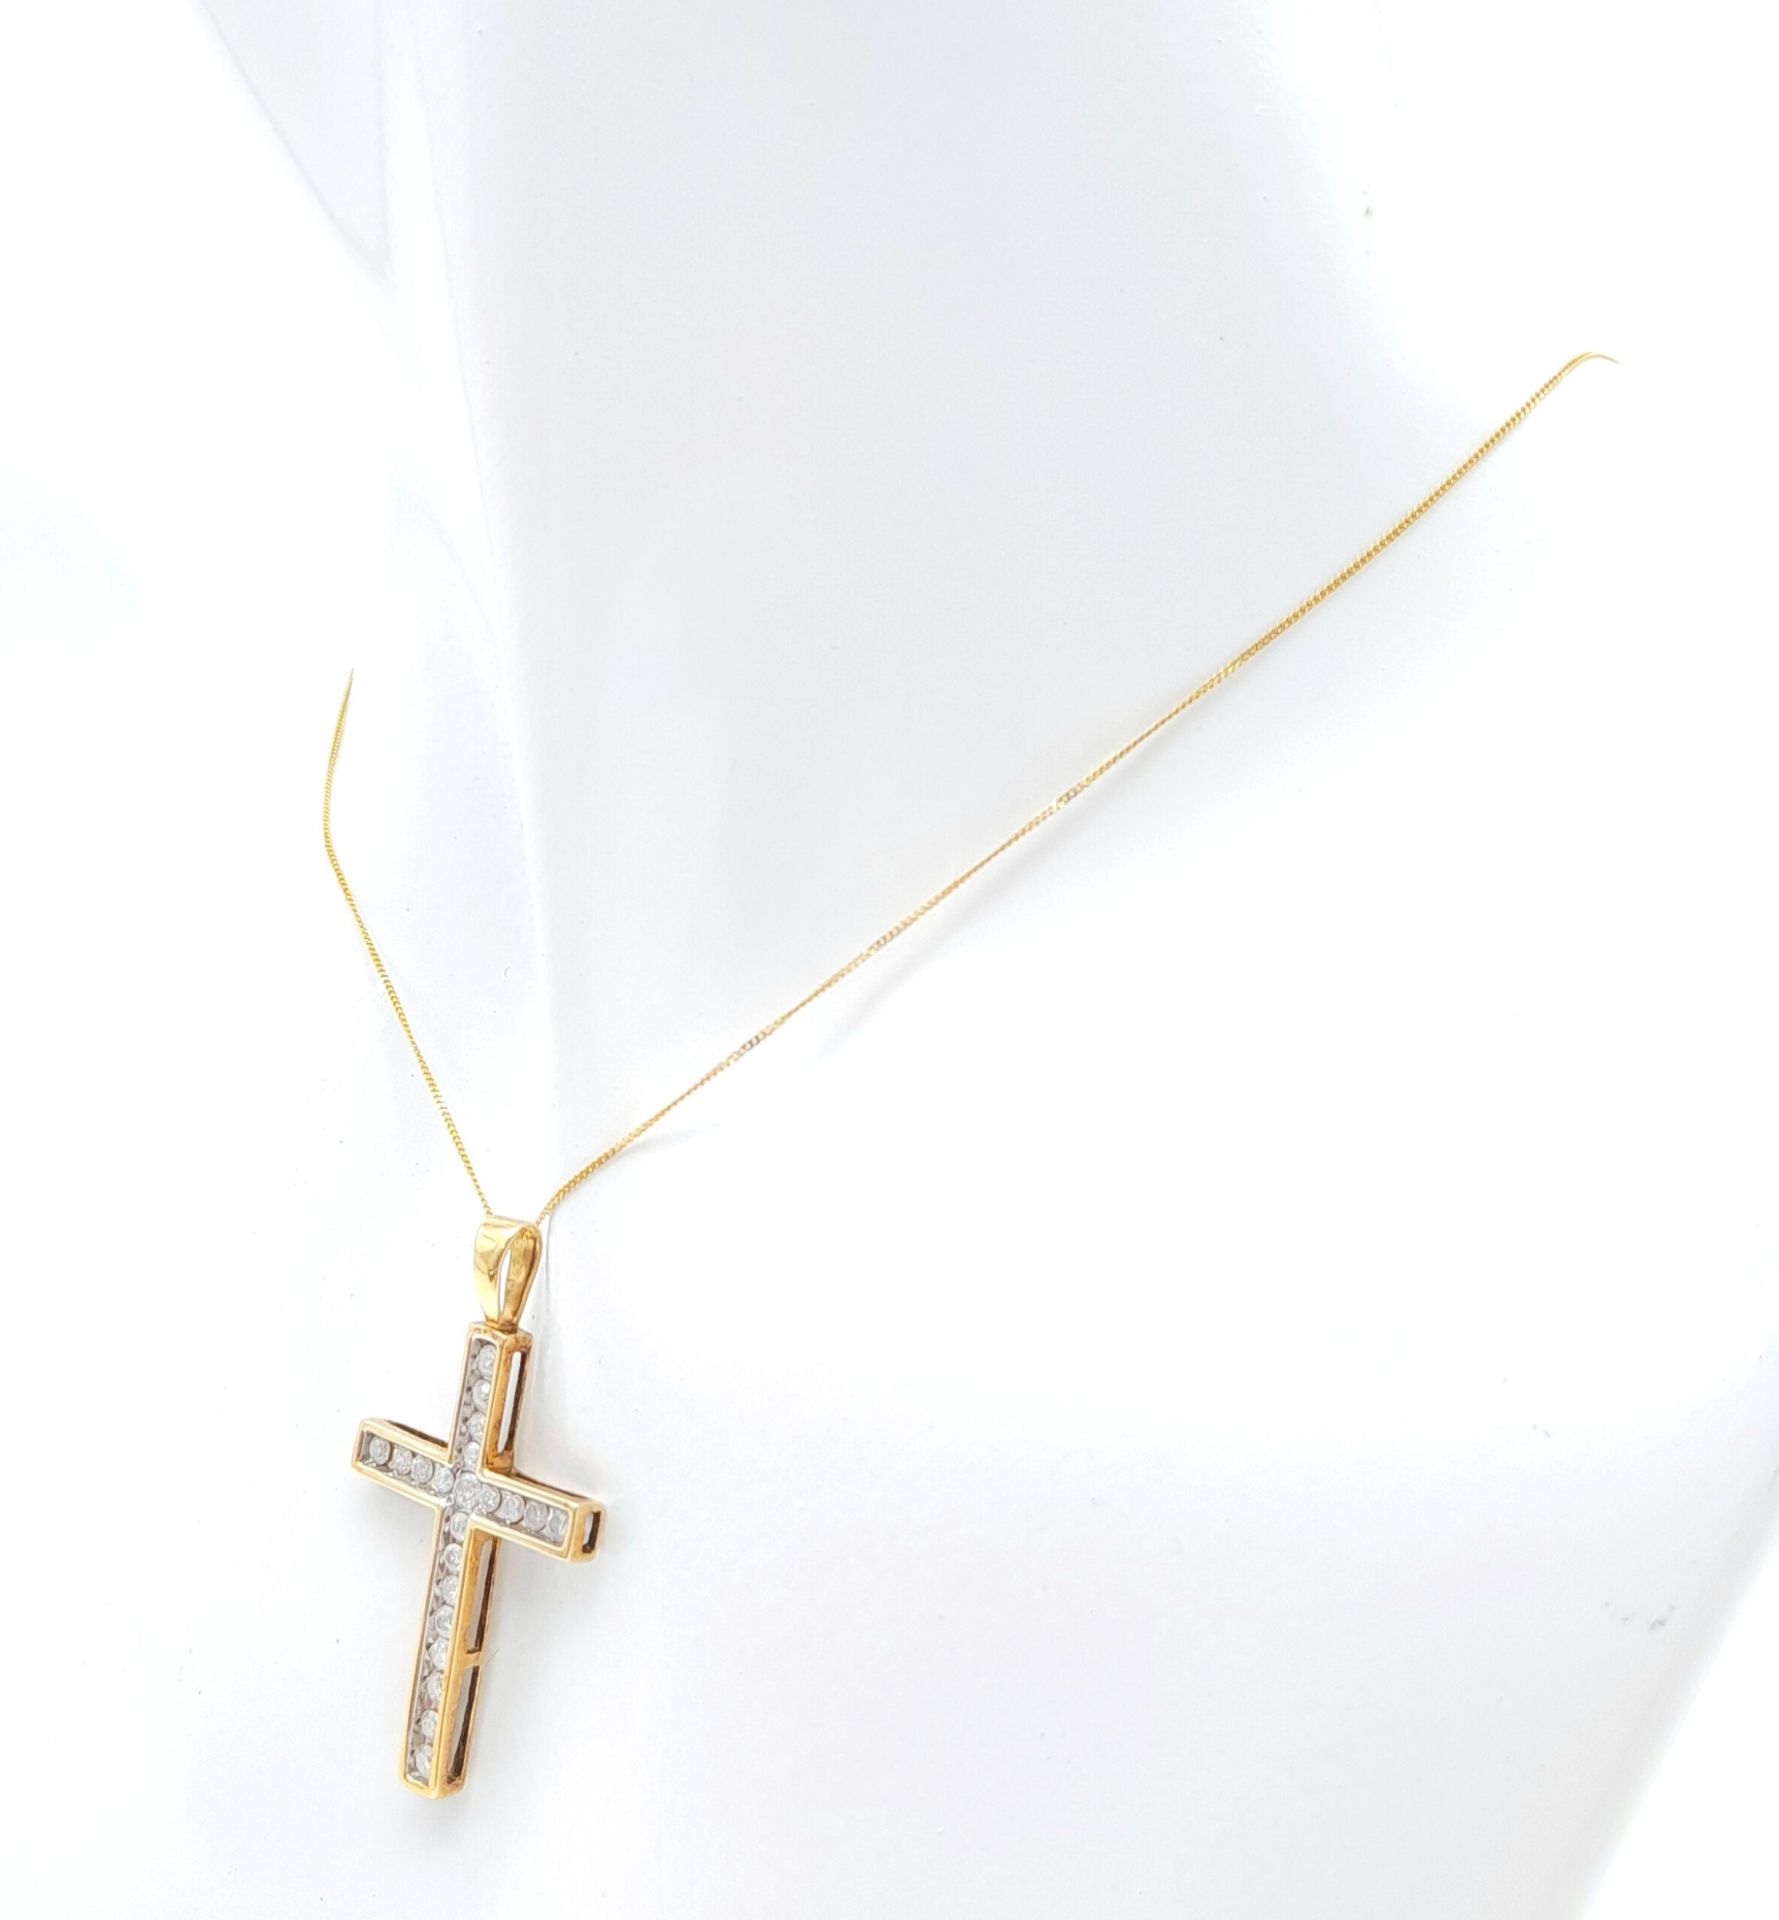 A 10K yellow gold diamond set cross pendant set on 16" 9K yellow gold fine curb chain, 2.4g total - Image 3 of 5